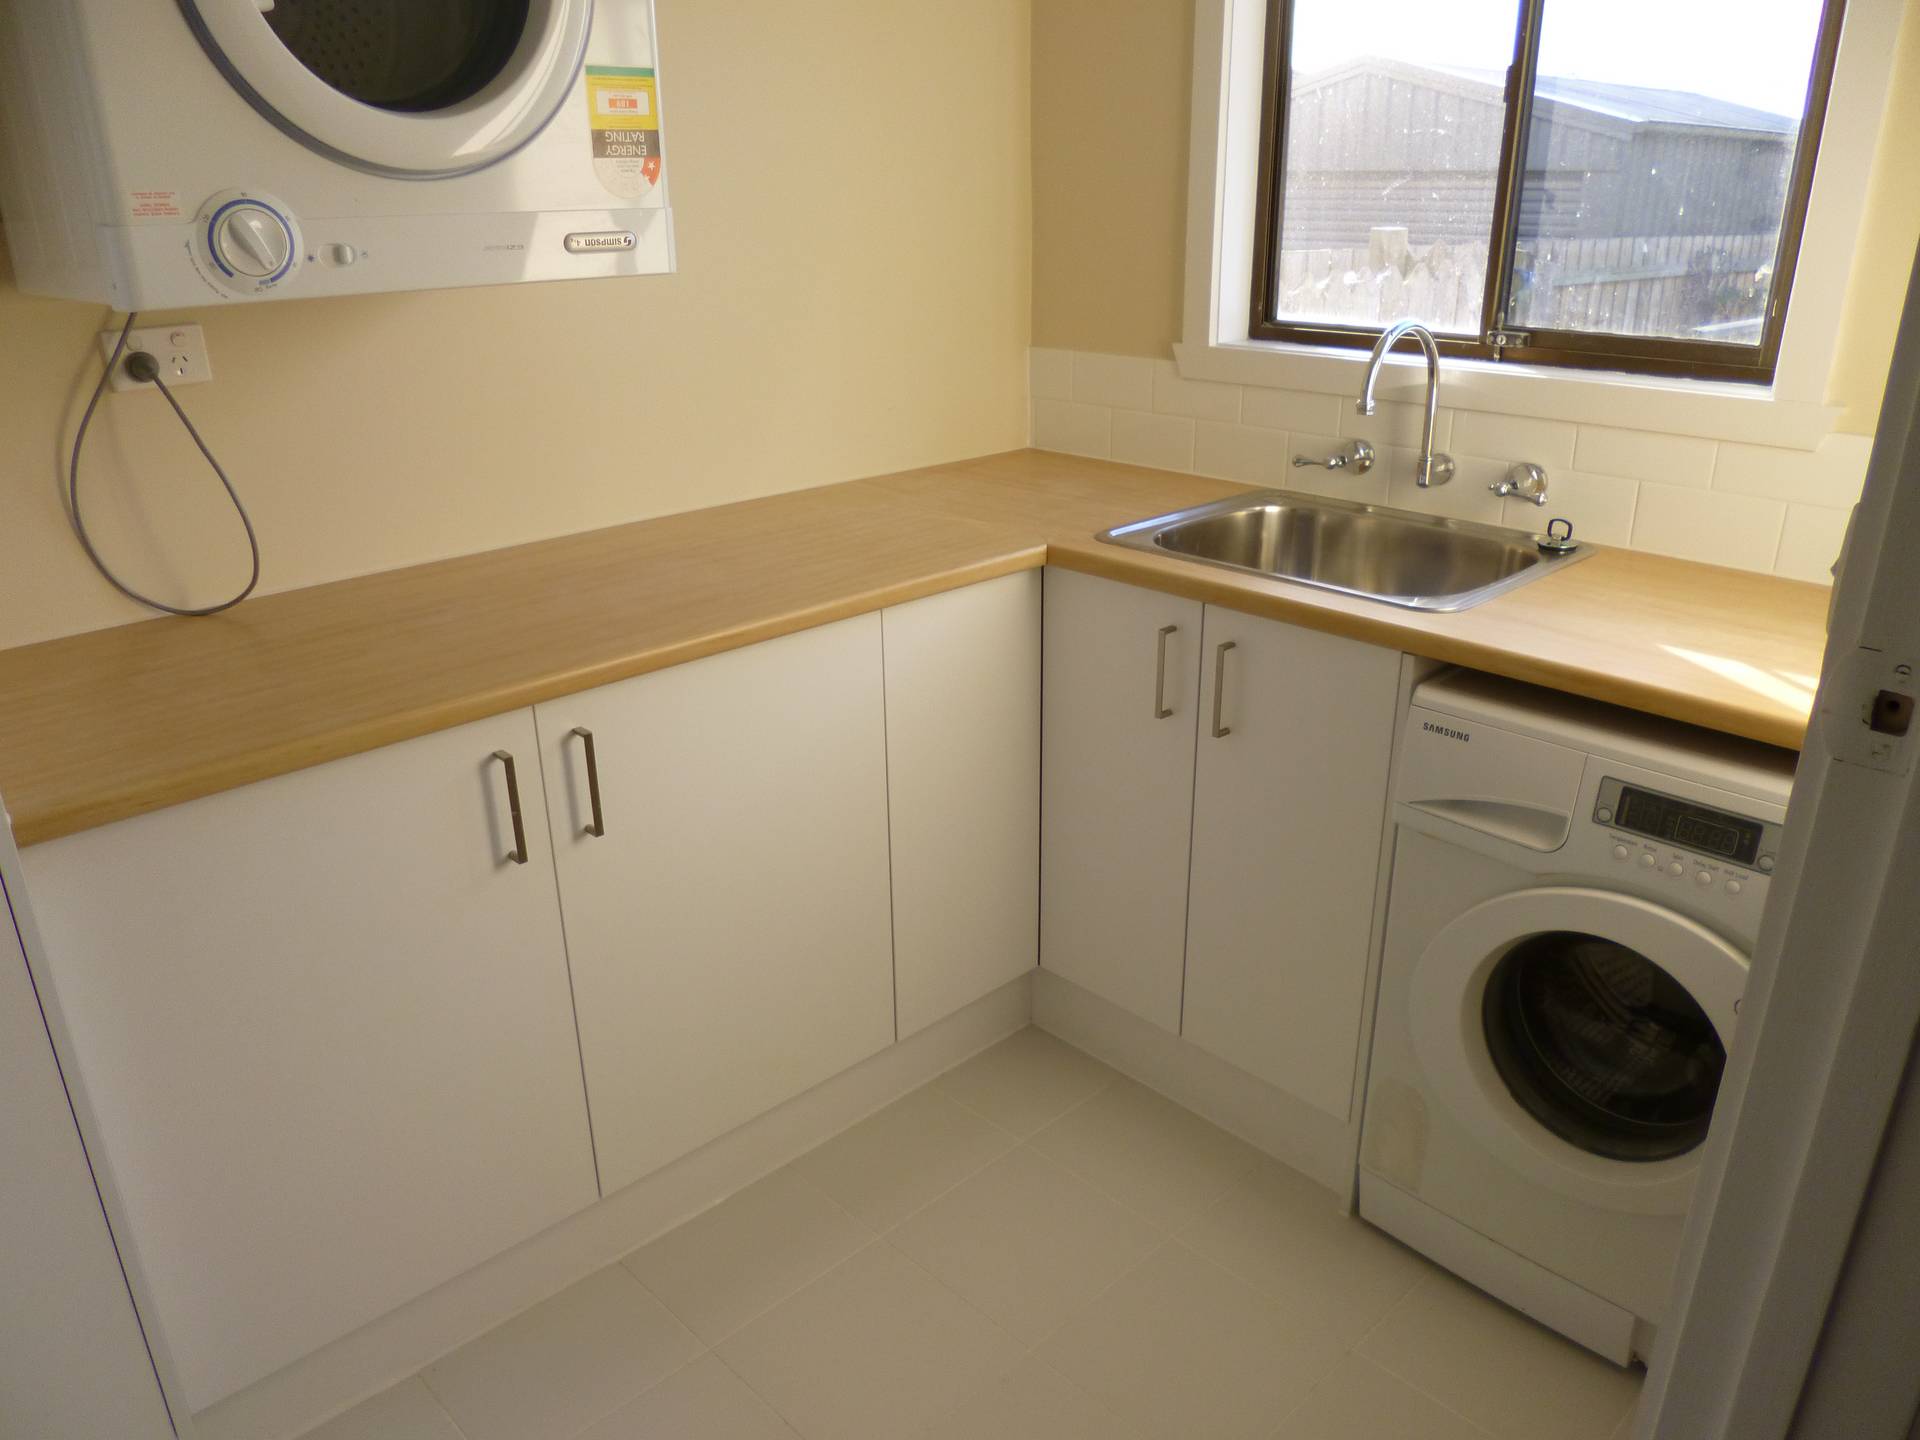 Laundry renovation with new floor tiles